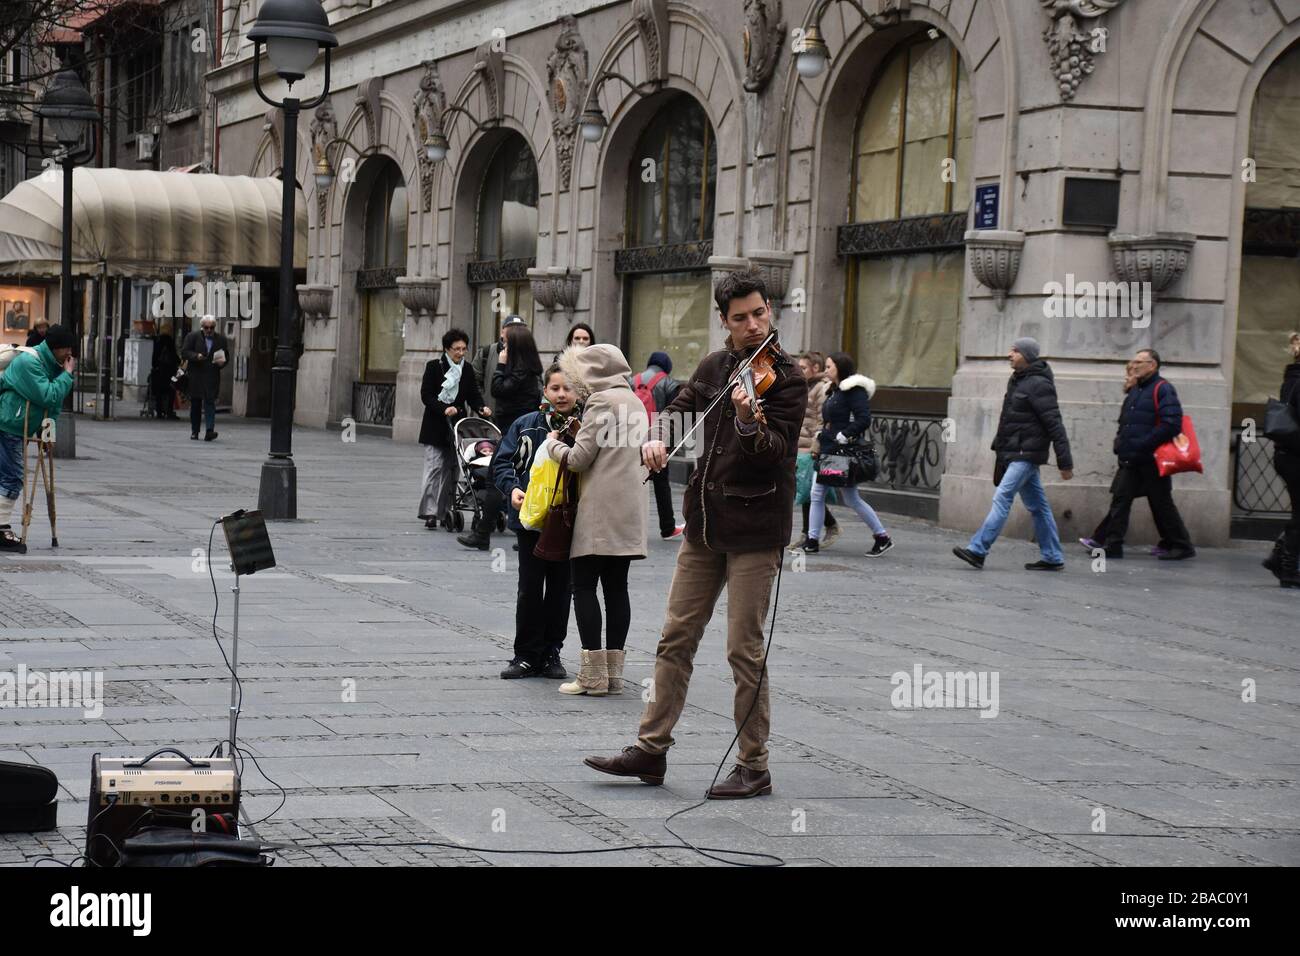 The young man in the brown suit is a street player on Knez Mihailova Street in Belgrade Stock Photo